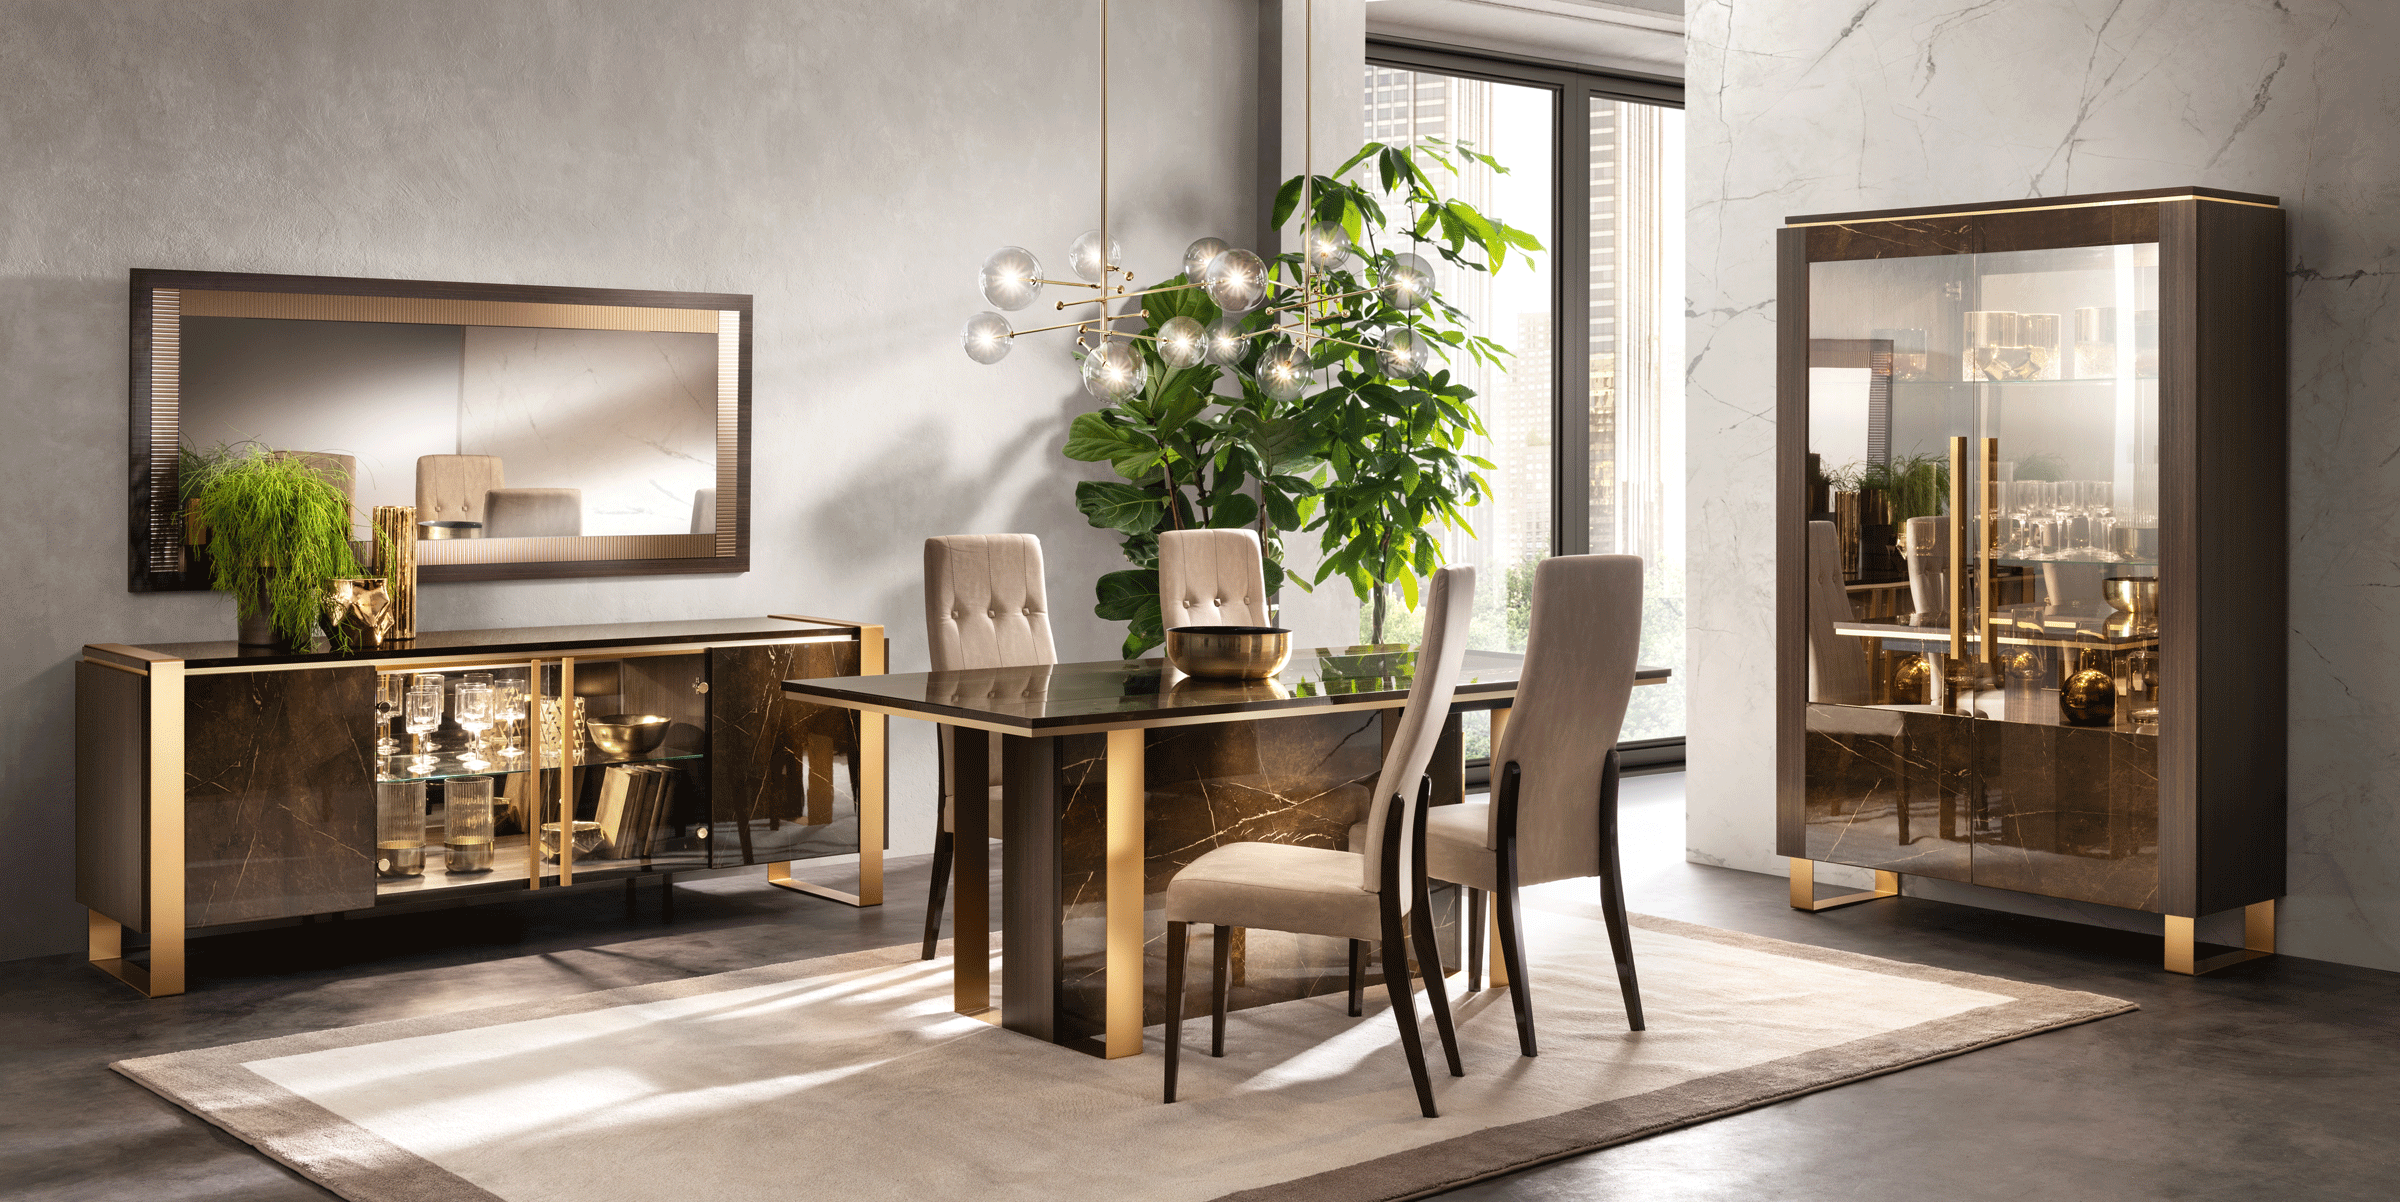 Dining Room Furniture Tables Essenza Dining by Arredoclassic, Italy Additional